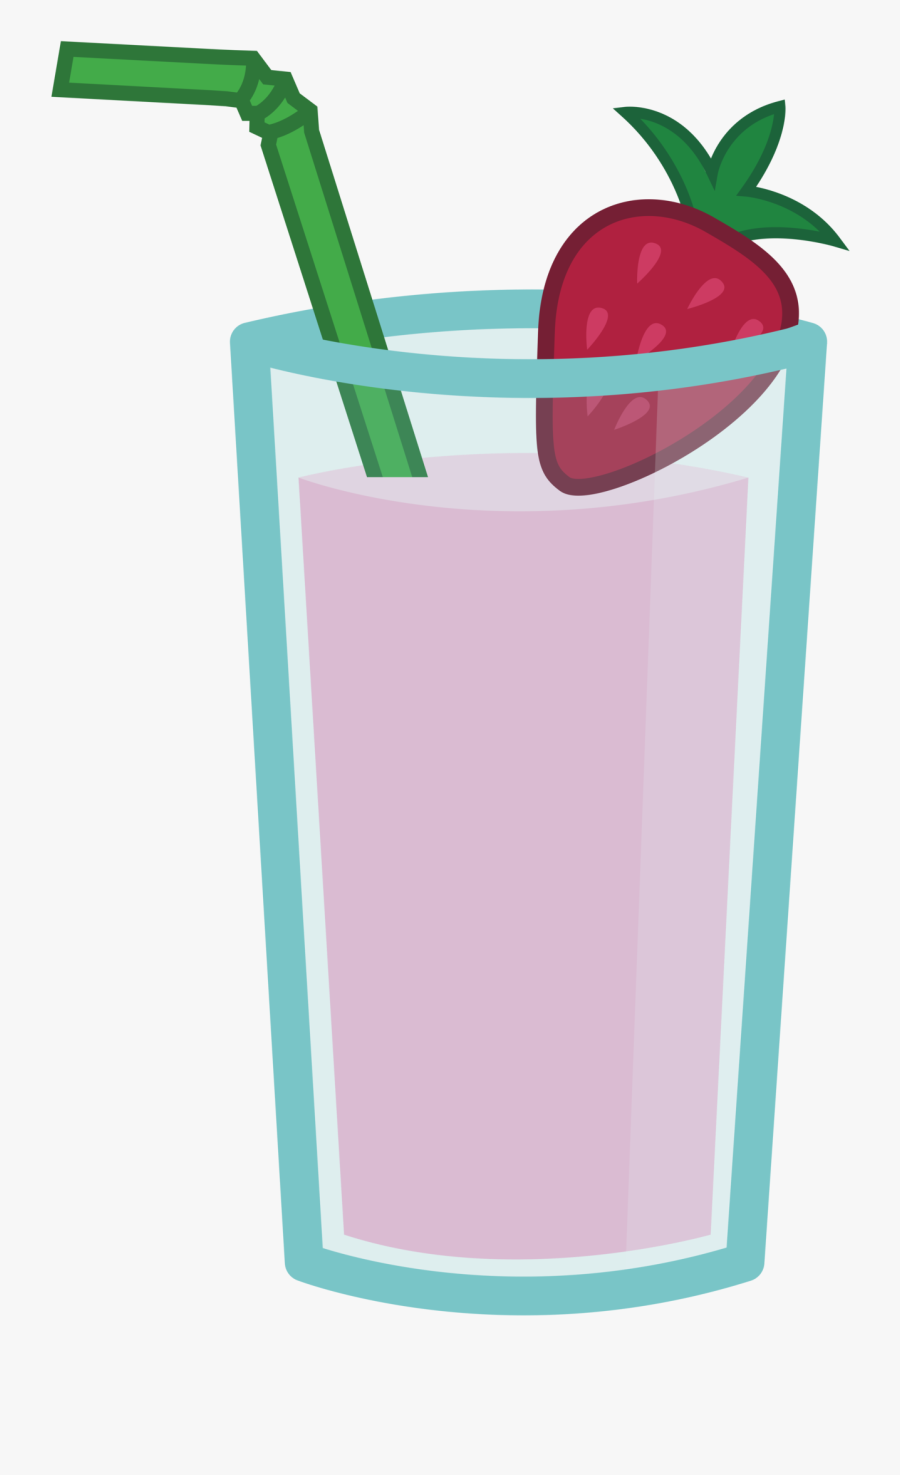 Drink Clipart Smoothie Cup Pencil And In Color Drink - Strawberry And Banana Smoothie Cartoon, Transparent Clipart